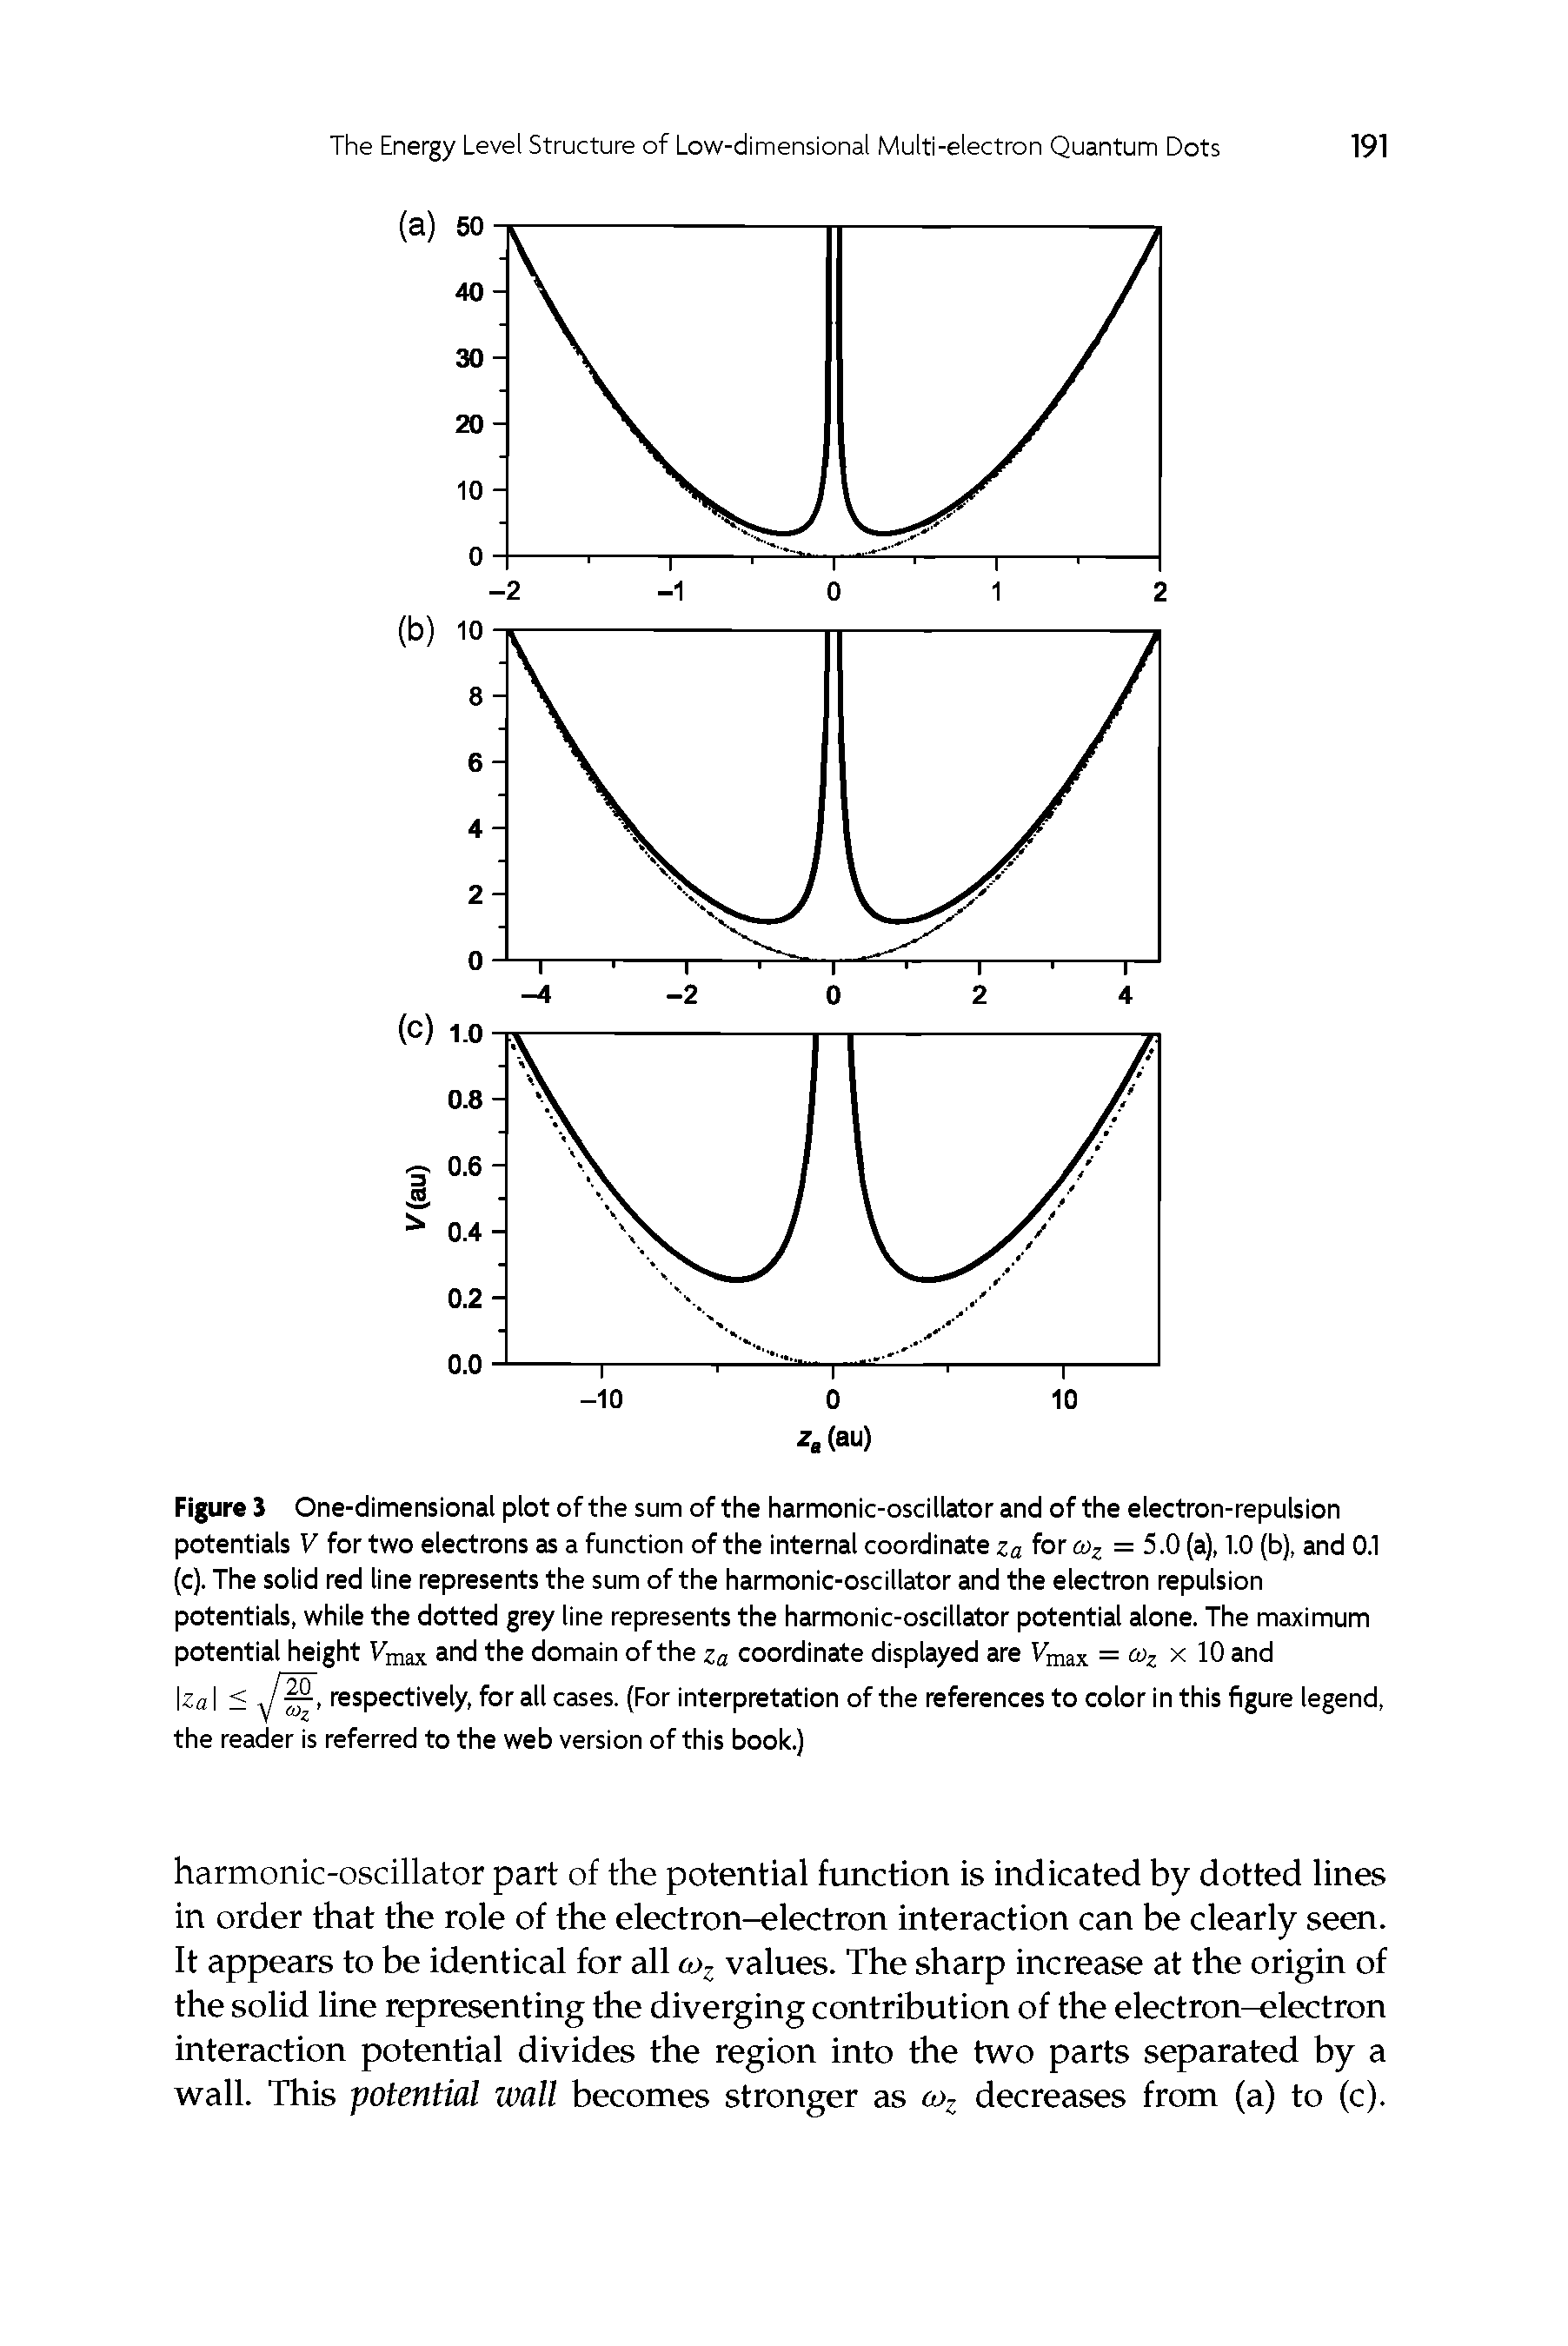 Figure J One-dimensional plot of the sum of the harmonic-oscillator and of the electron-repulsion potentials V for two electrons as a function of the internal coordinate za for coz = 5.0(a), 1.0 (b), and 0.1 (c). The solid red line represents the sum of the harmonic-oscillator and the electron repulsion potentials, while the dotted grey line represents the harmonic-oscillator potential alone. The maximum potential height Vmax and the domain of the za coordinate displayed are Vmax = coz x 10 and Iza I < respectively, for all cases. (For interpretation of the references to color in this figure legend,...